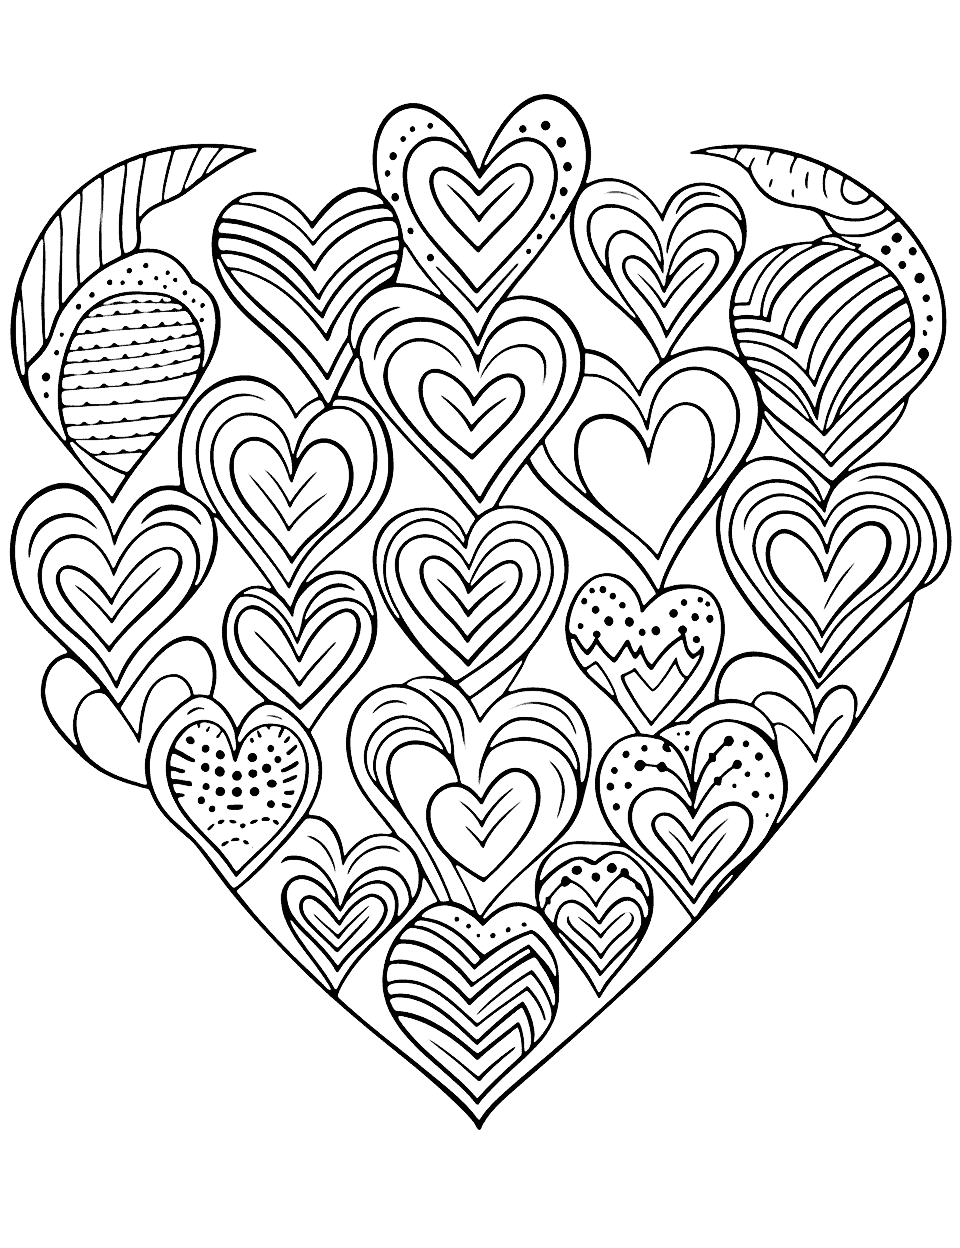 Heart Doodles Coloring Page - A page full of heart doodles of various sizes and styles.